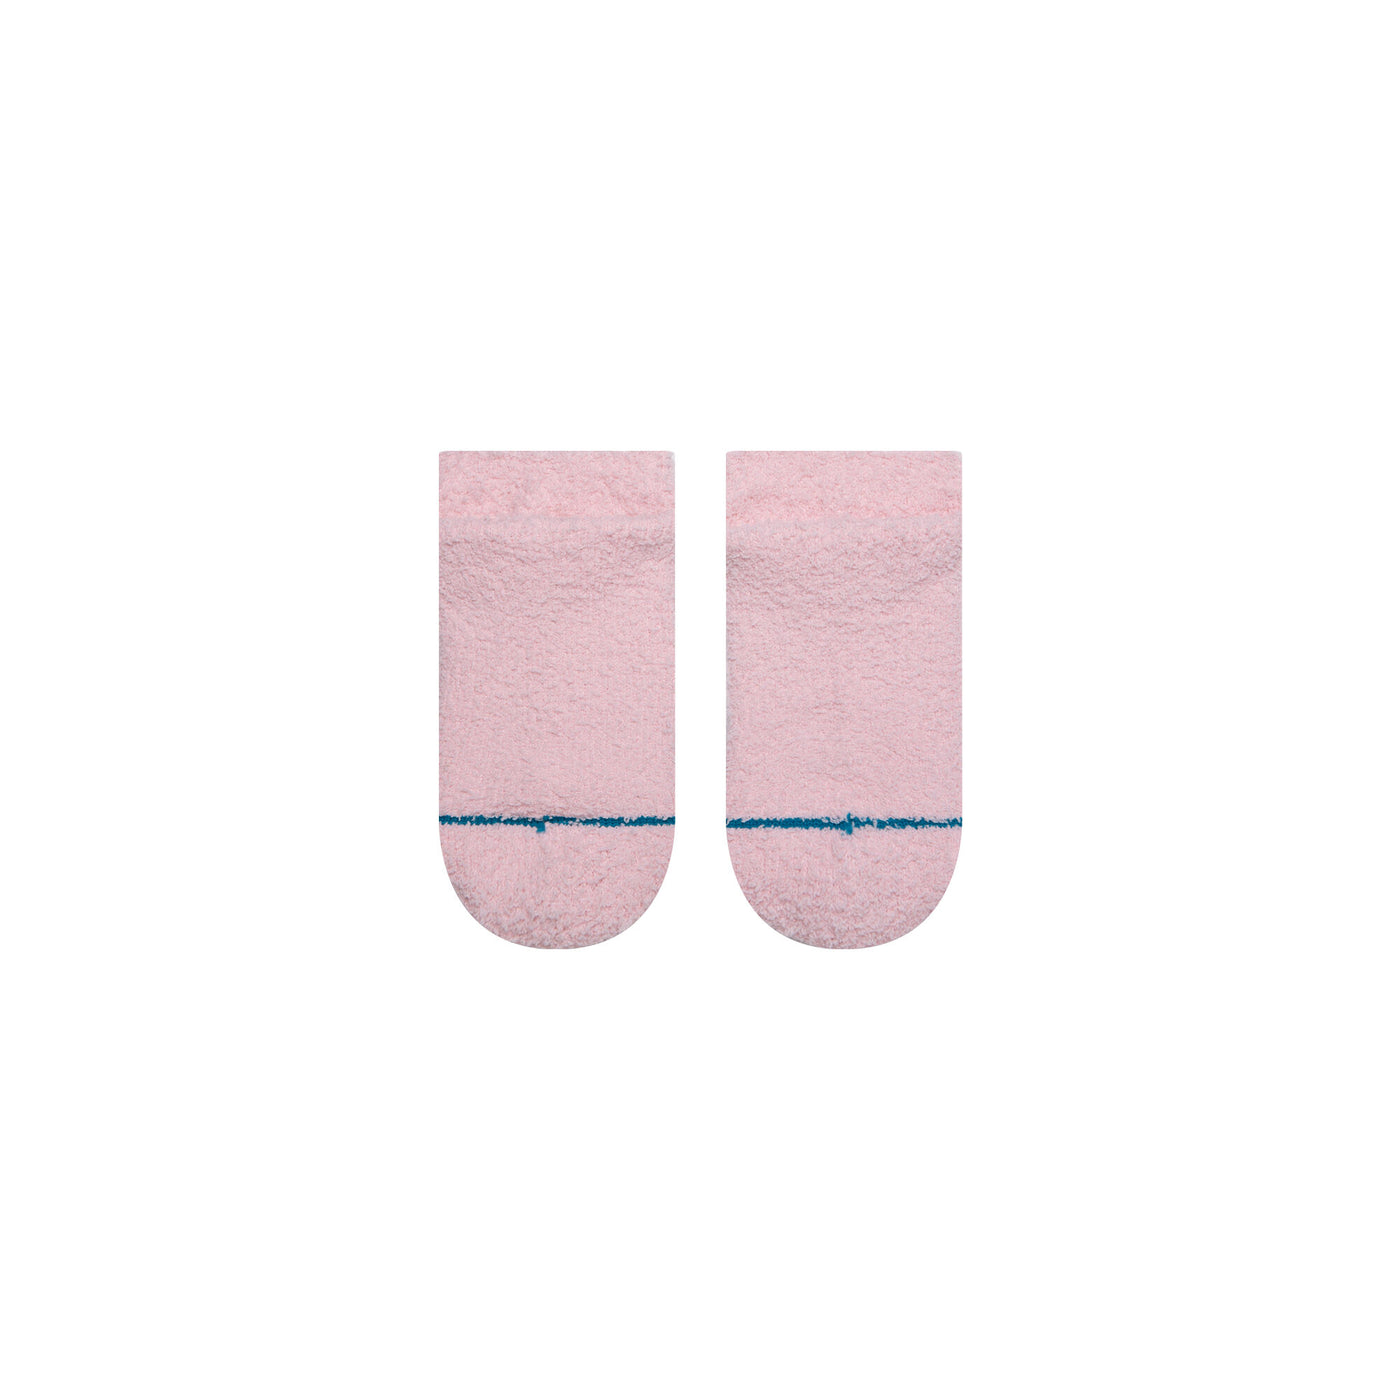 STANCE COCO COZY HEAVY CUSHION POLY BLEND LOW SOCKS PINK